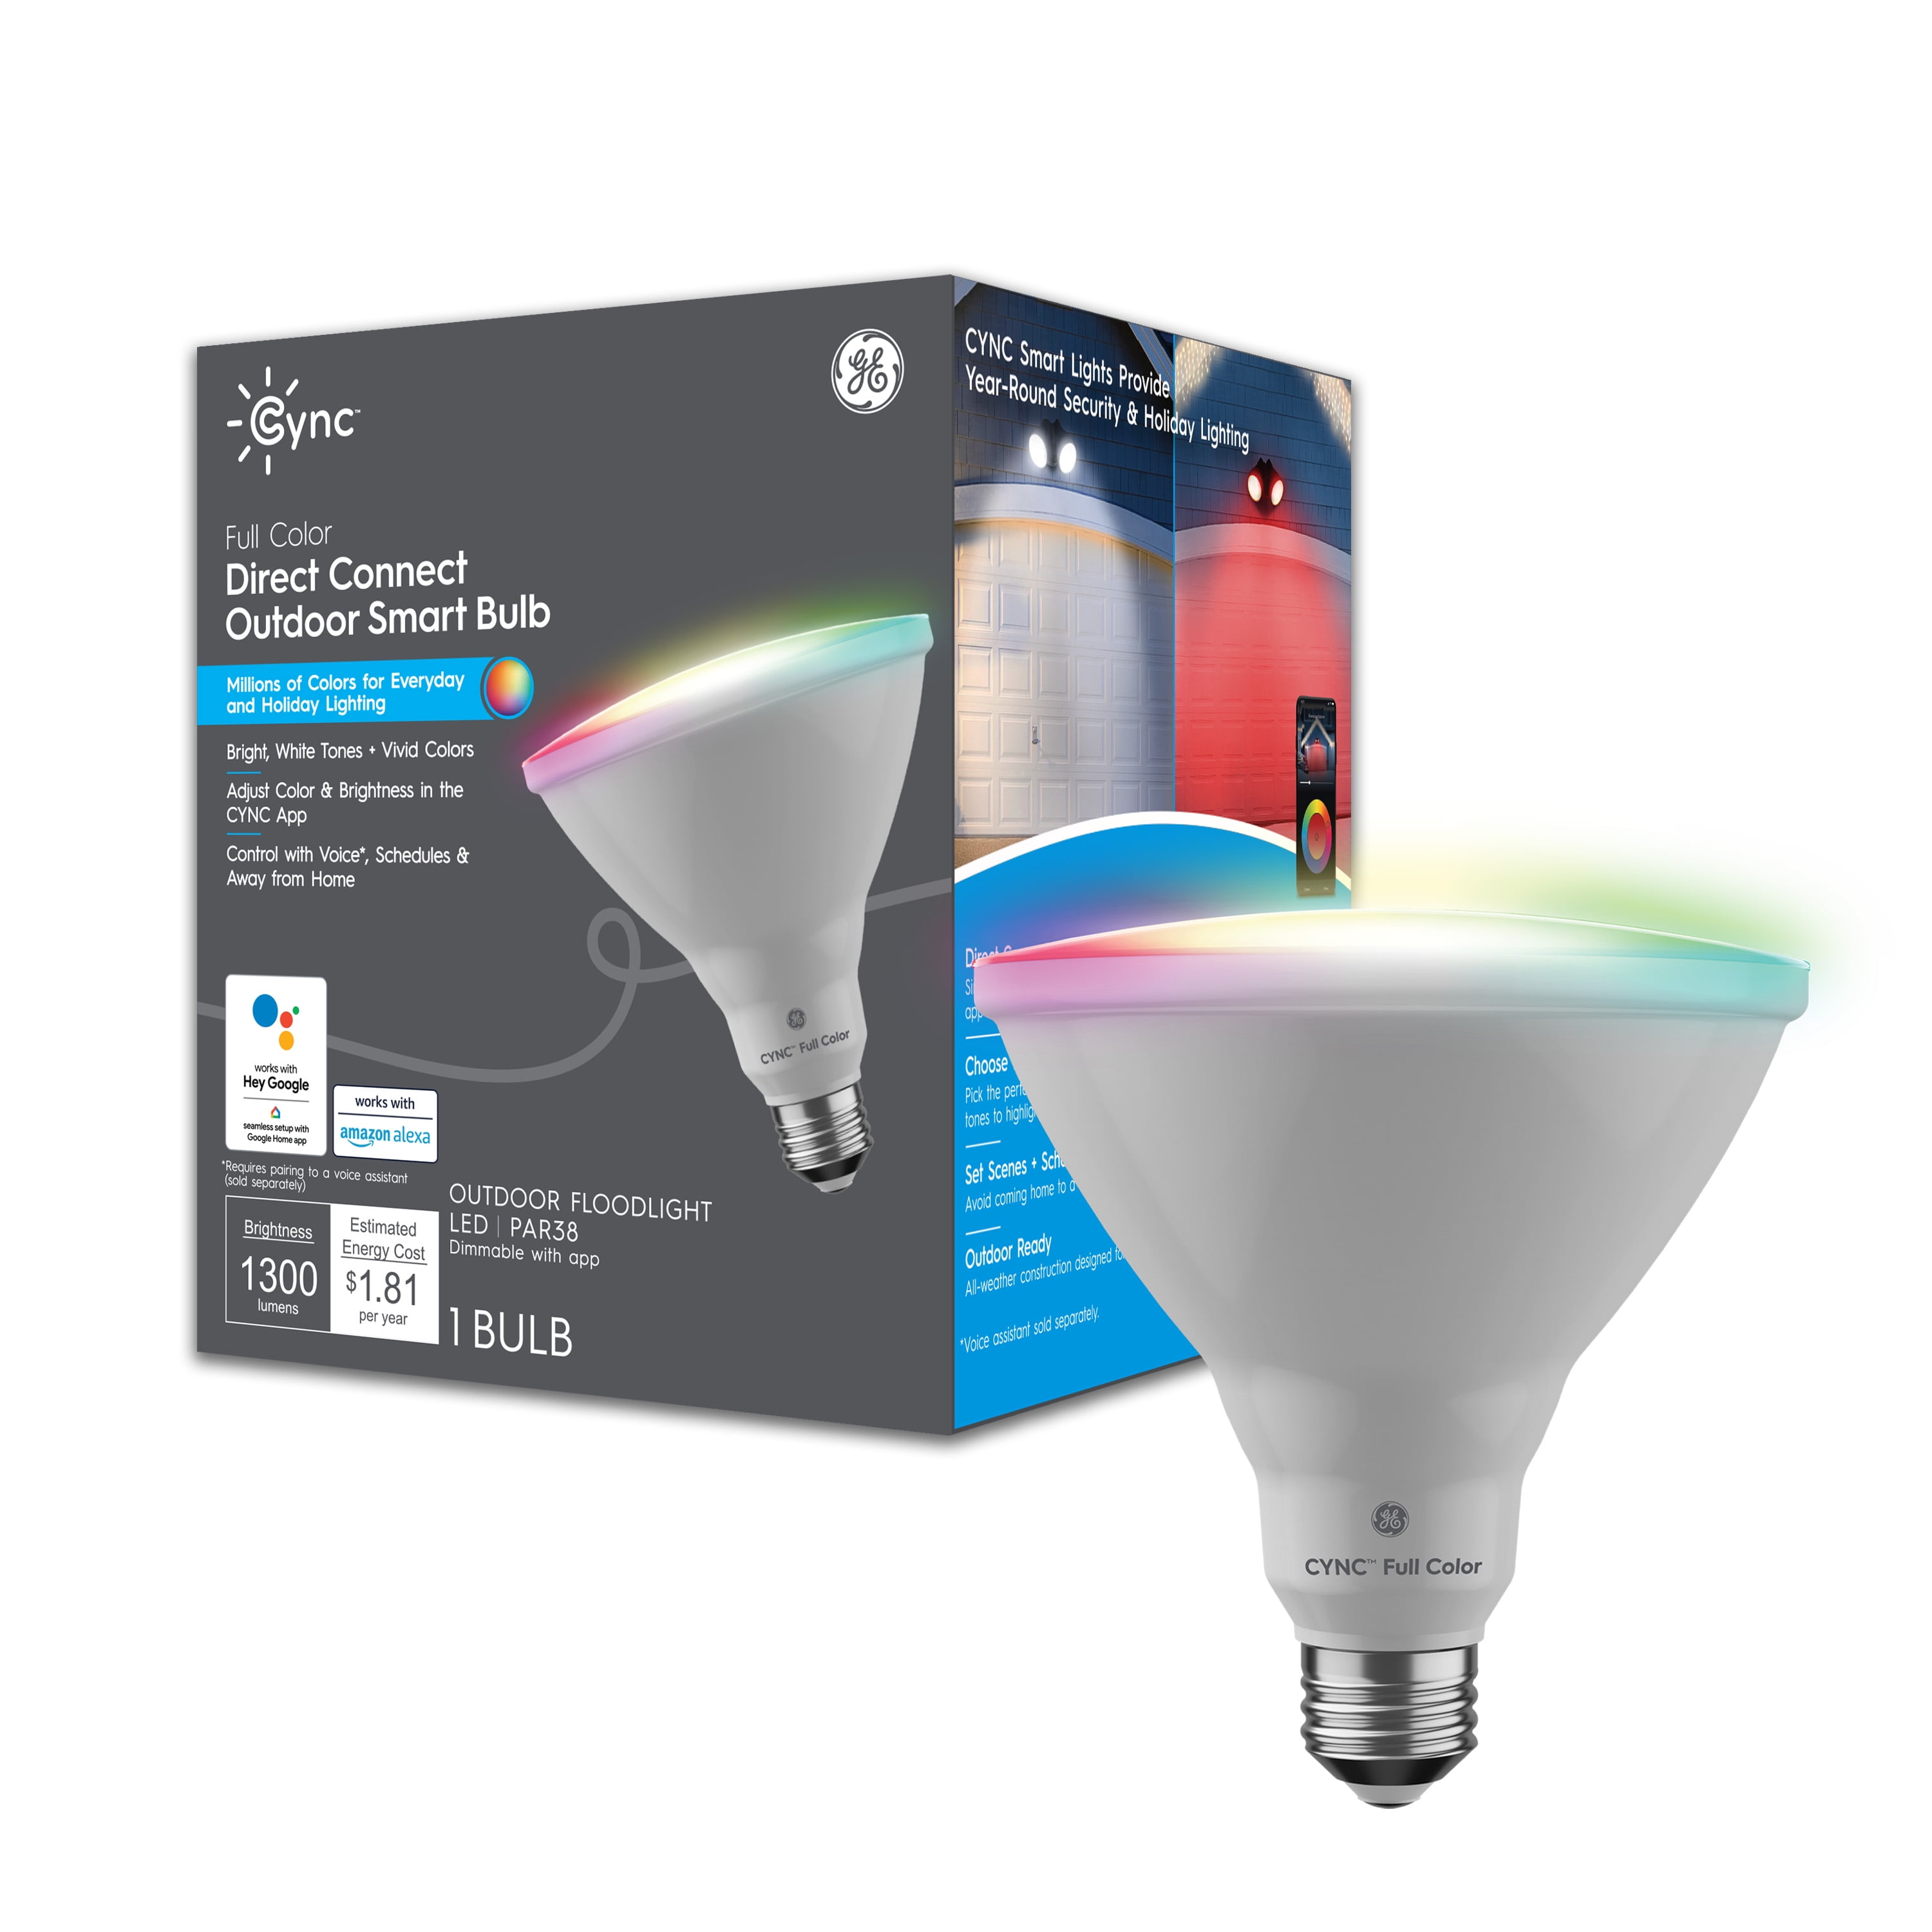 GE CYNC Smart Outdoor PAR38 Floodlight Bulb, Full Color, Bluetooth and Wi-Fi Enabled, 15 Watts